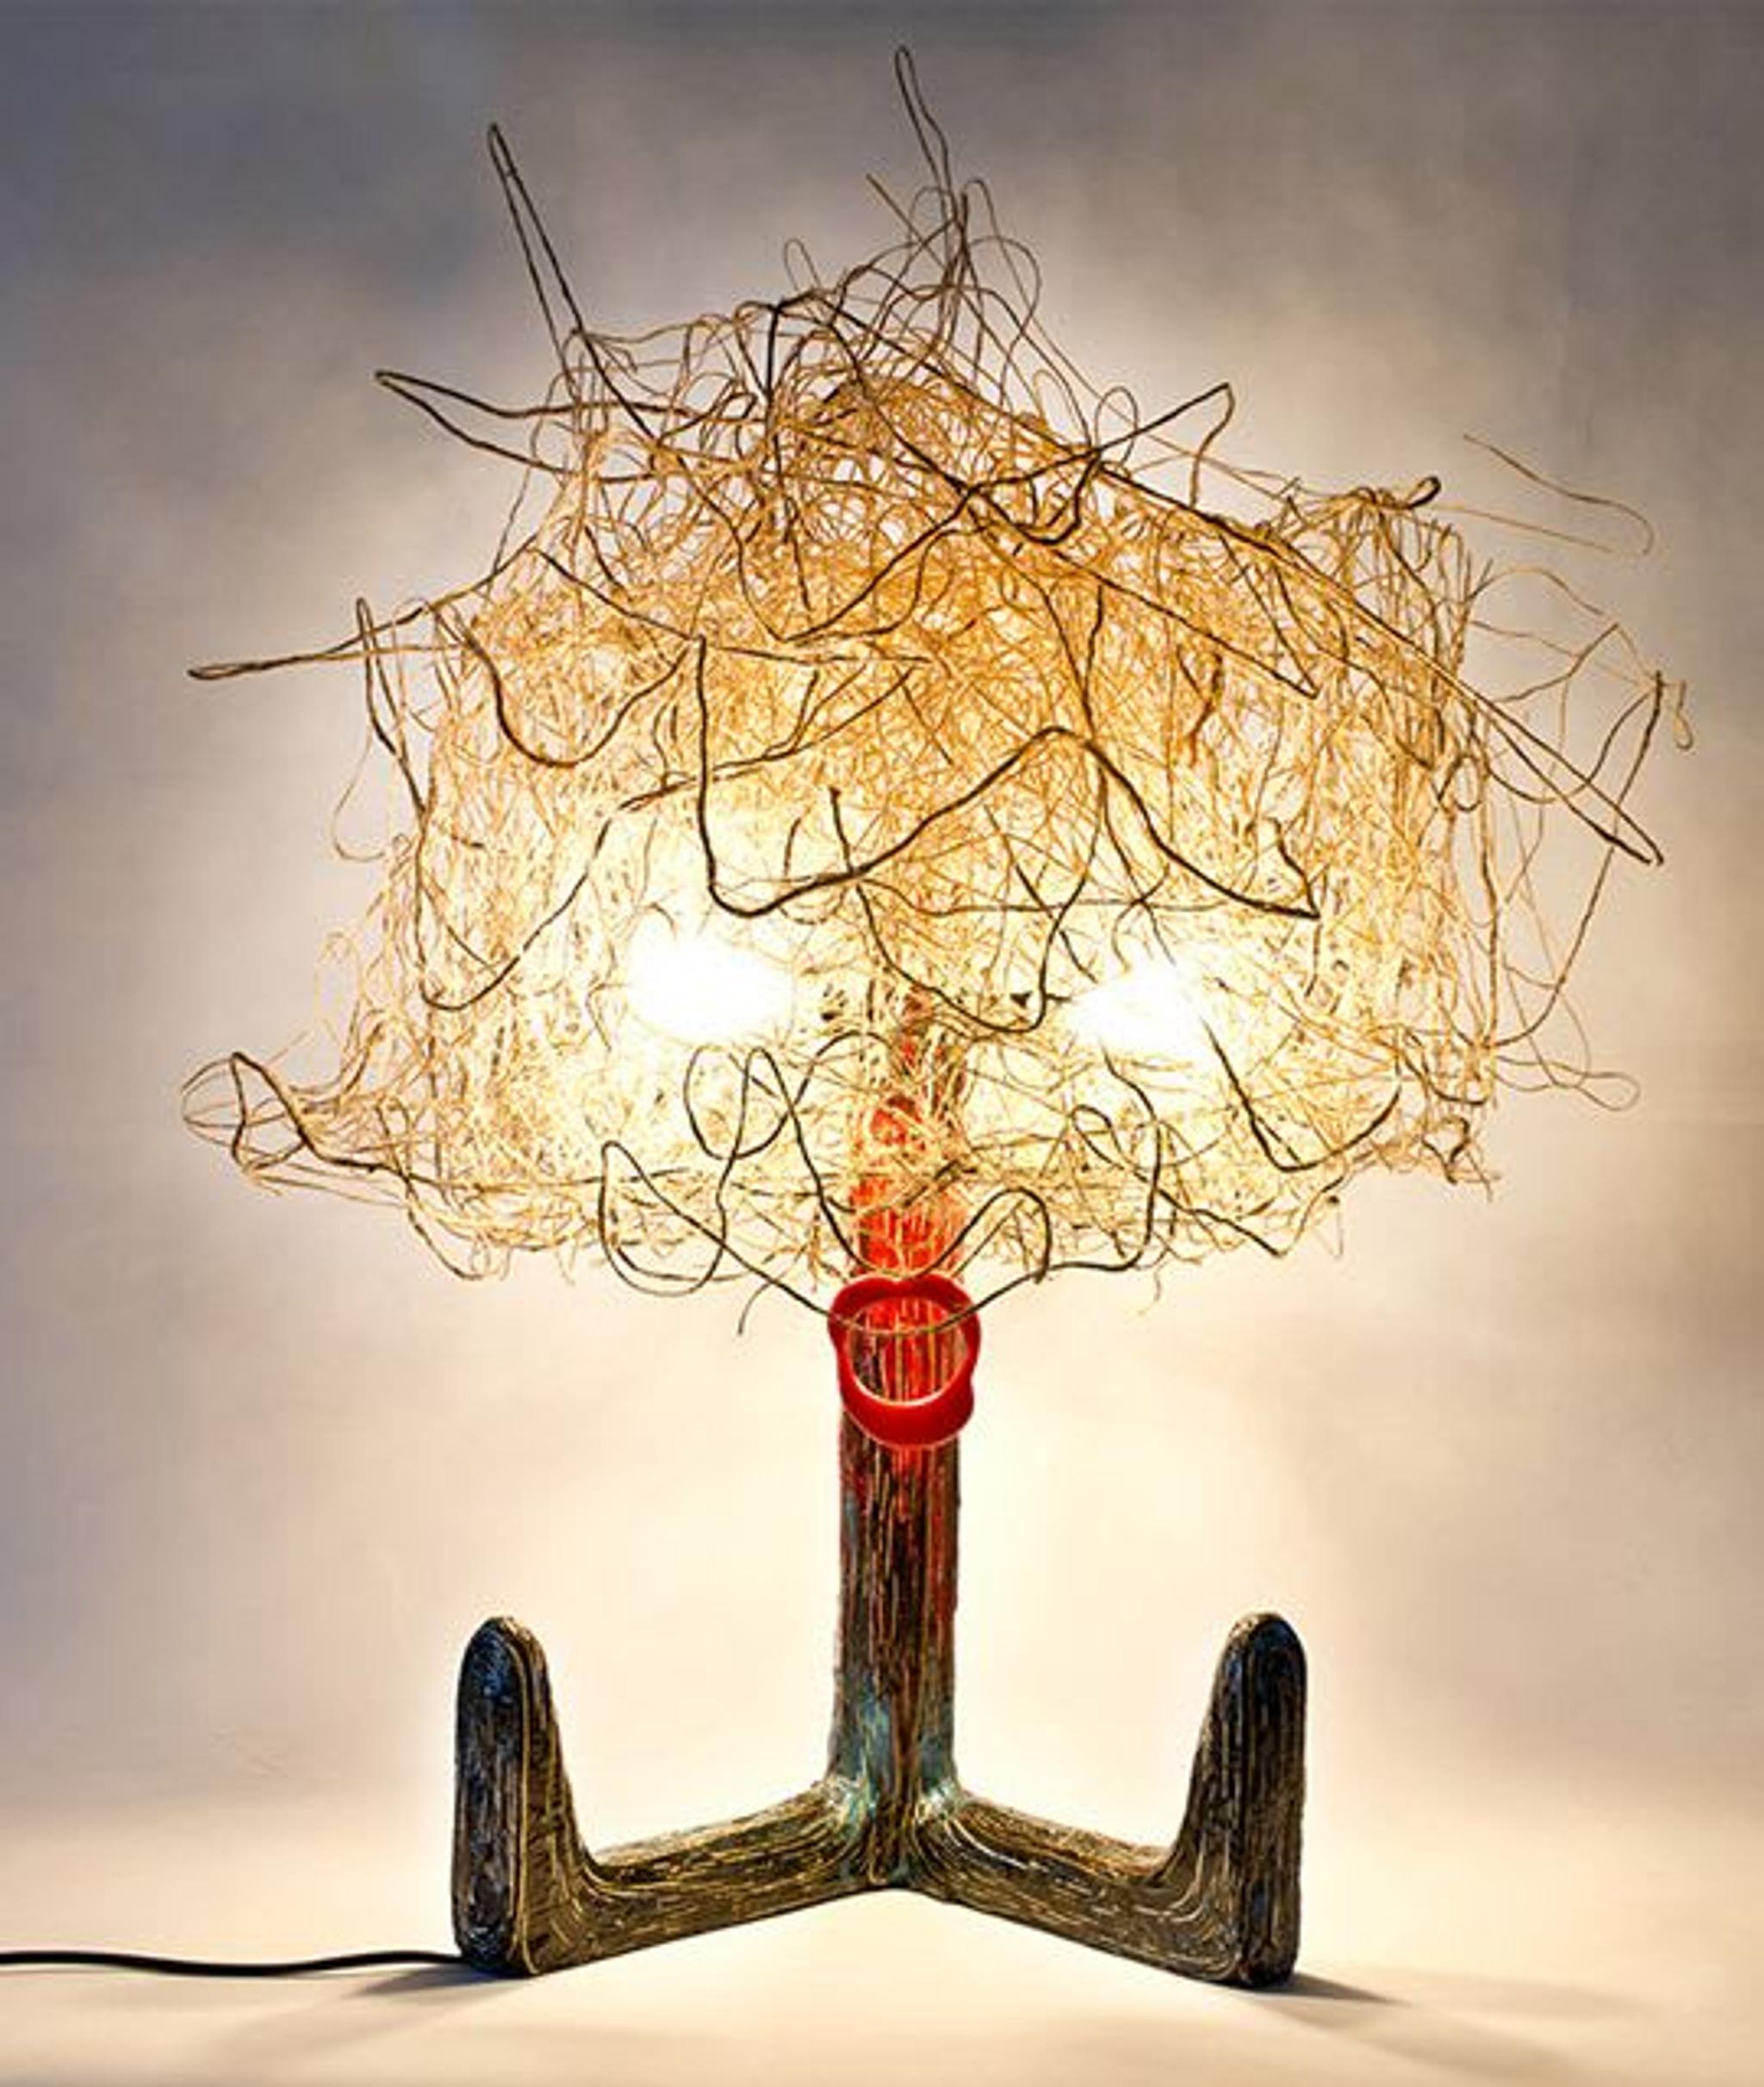 Kid Lamp in  twine and resin designed by Gaetano Pesce in 2013